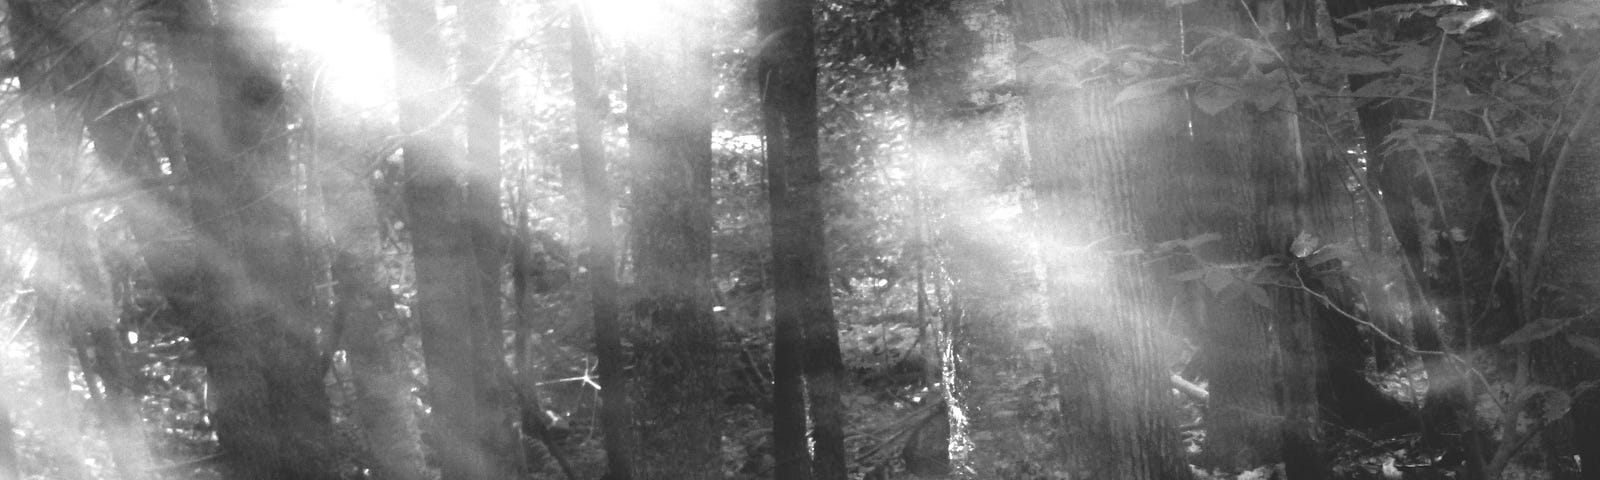 Sunlight filtered through a forest of trees, with smoke obscuring the light for a ghostly effect.